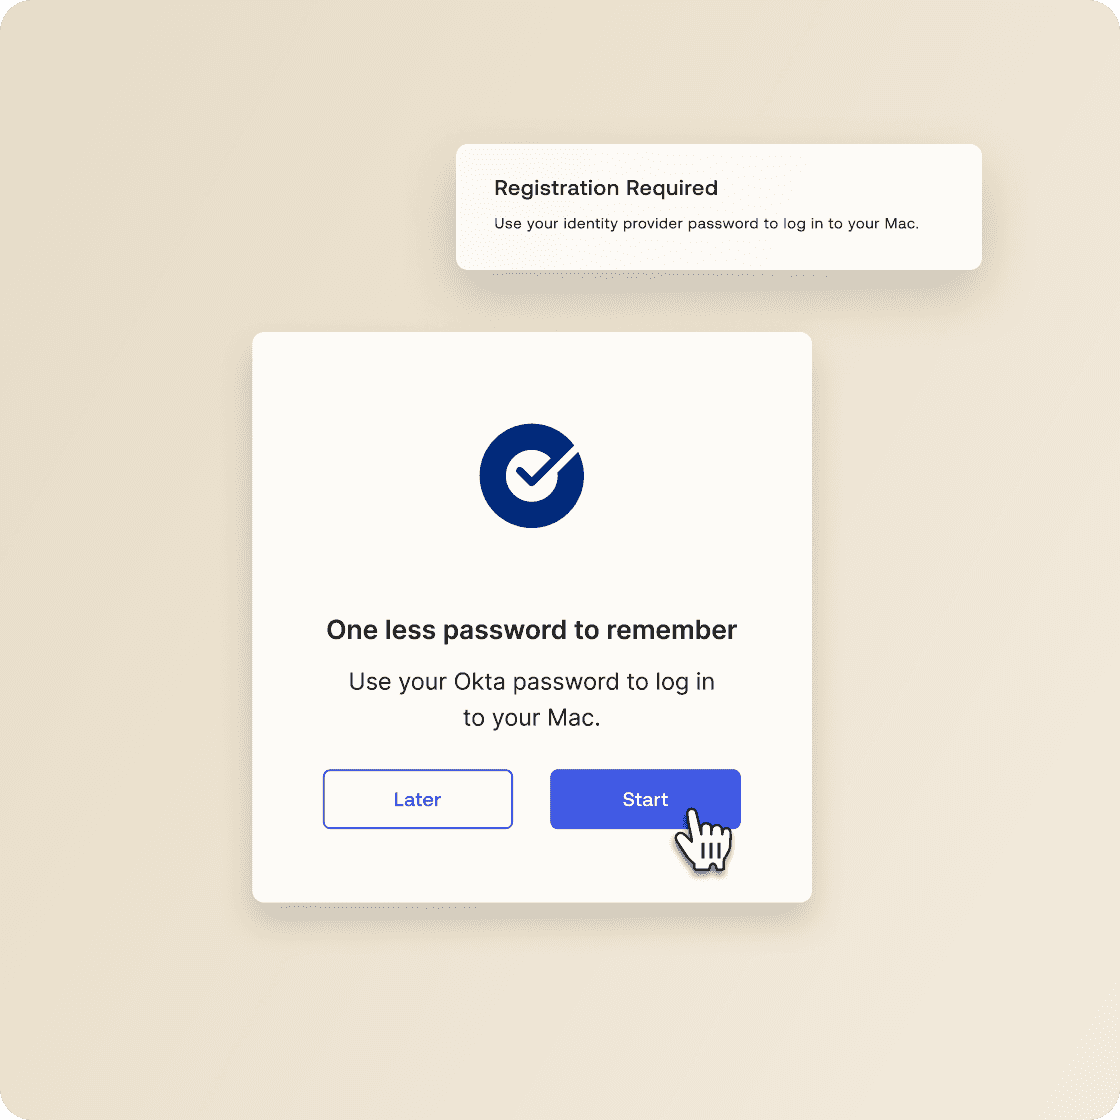 A pop-up encourages a desktop user to use Okta instead of needing to remember a password to log into their computer.